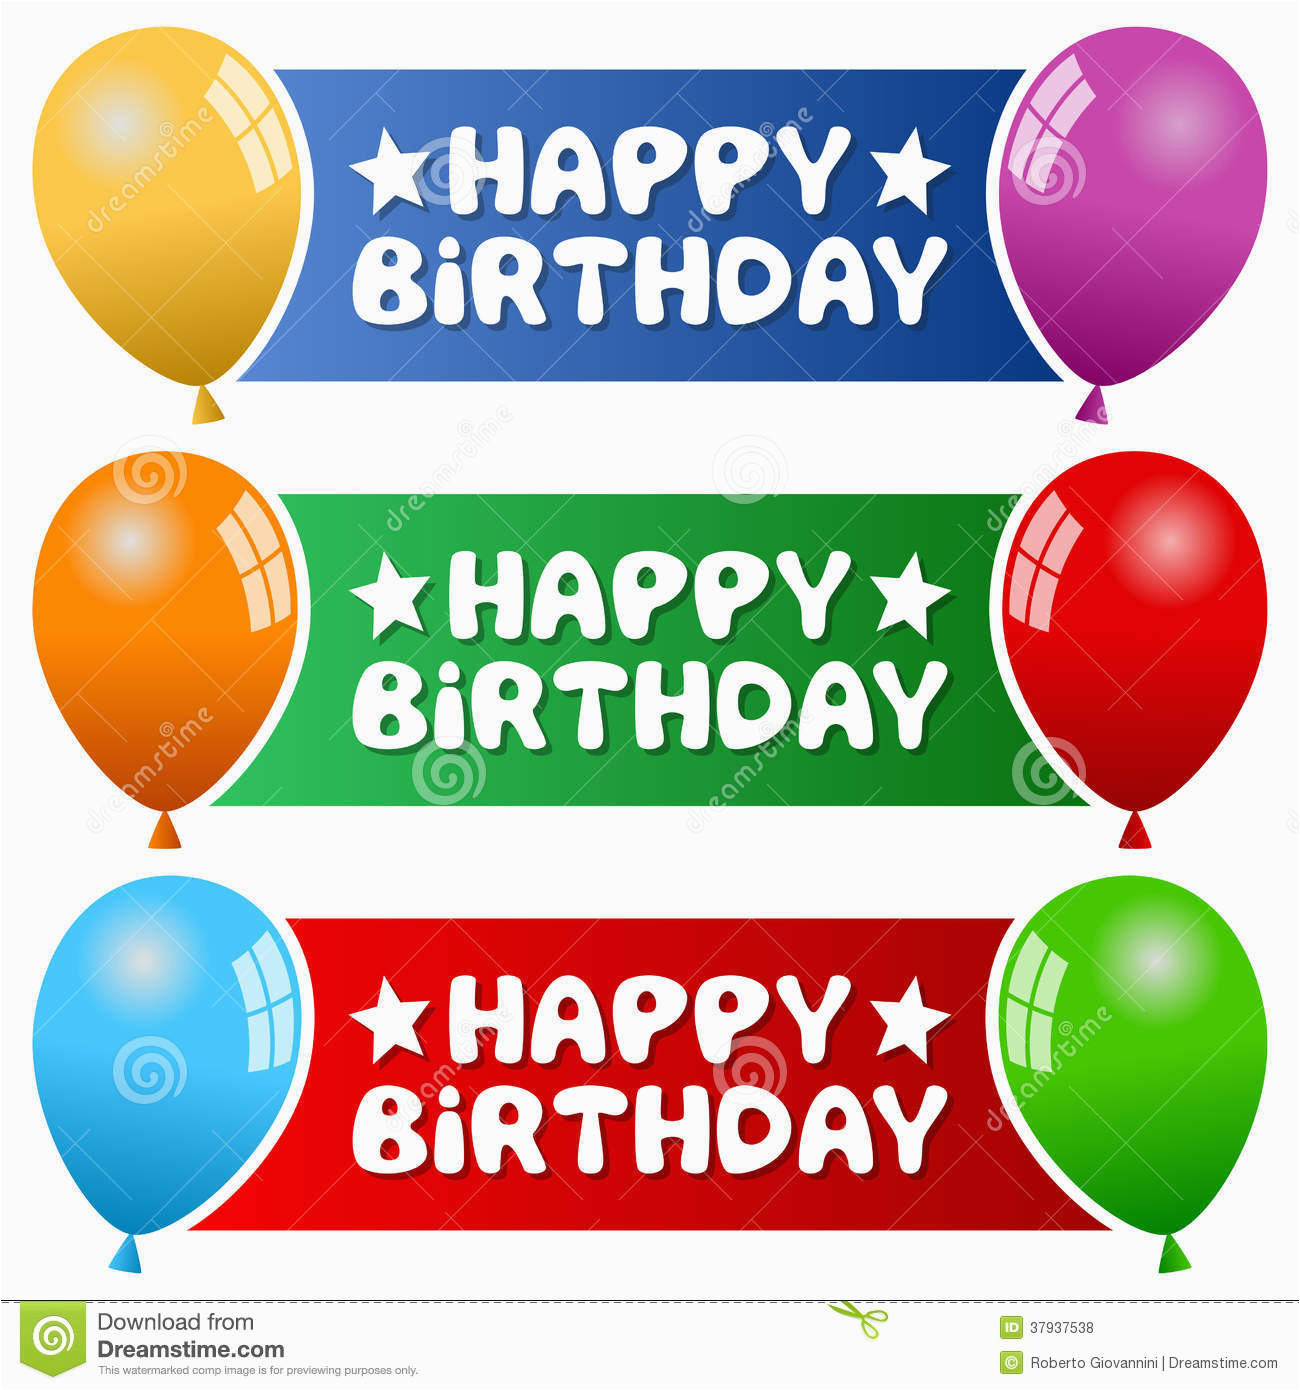 royalty free stock photos party balloons horizontal banners collection three happy birthday colorful blue green red background eps file image37937538